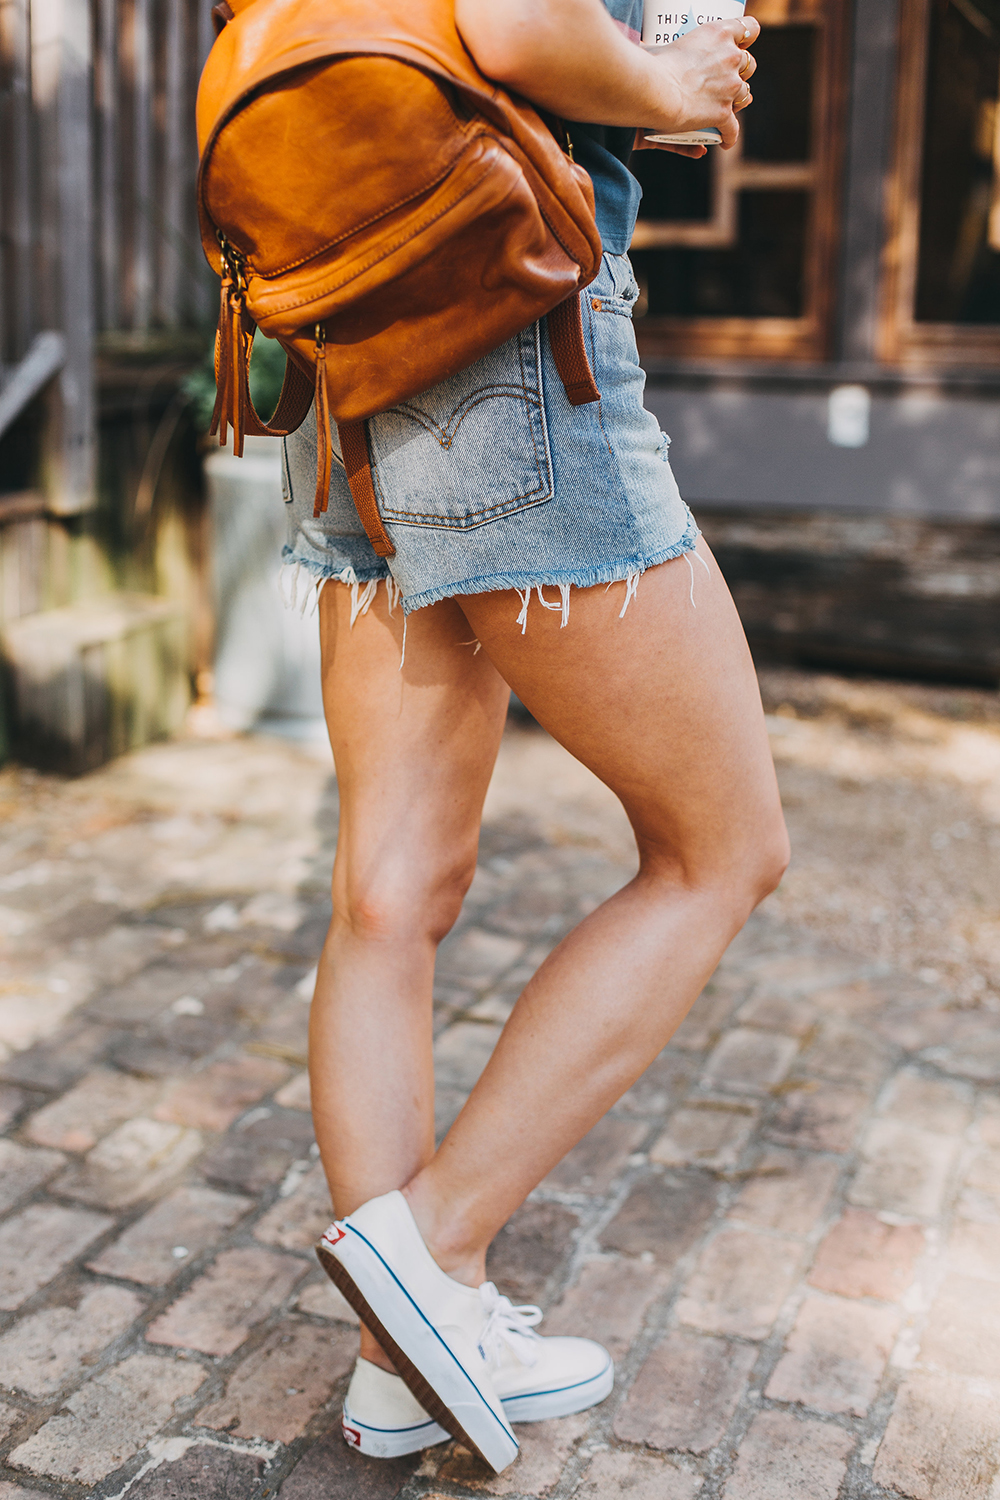 livvyland-blog-olivia-watson-austin-texas-fashion-style-urban-outfitters-striped-vintage-tee-levis-denim-wedgie-shorts-madewell-mini-leather-backpack-4